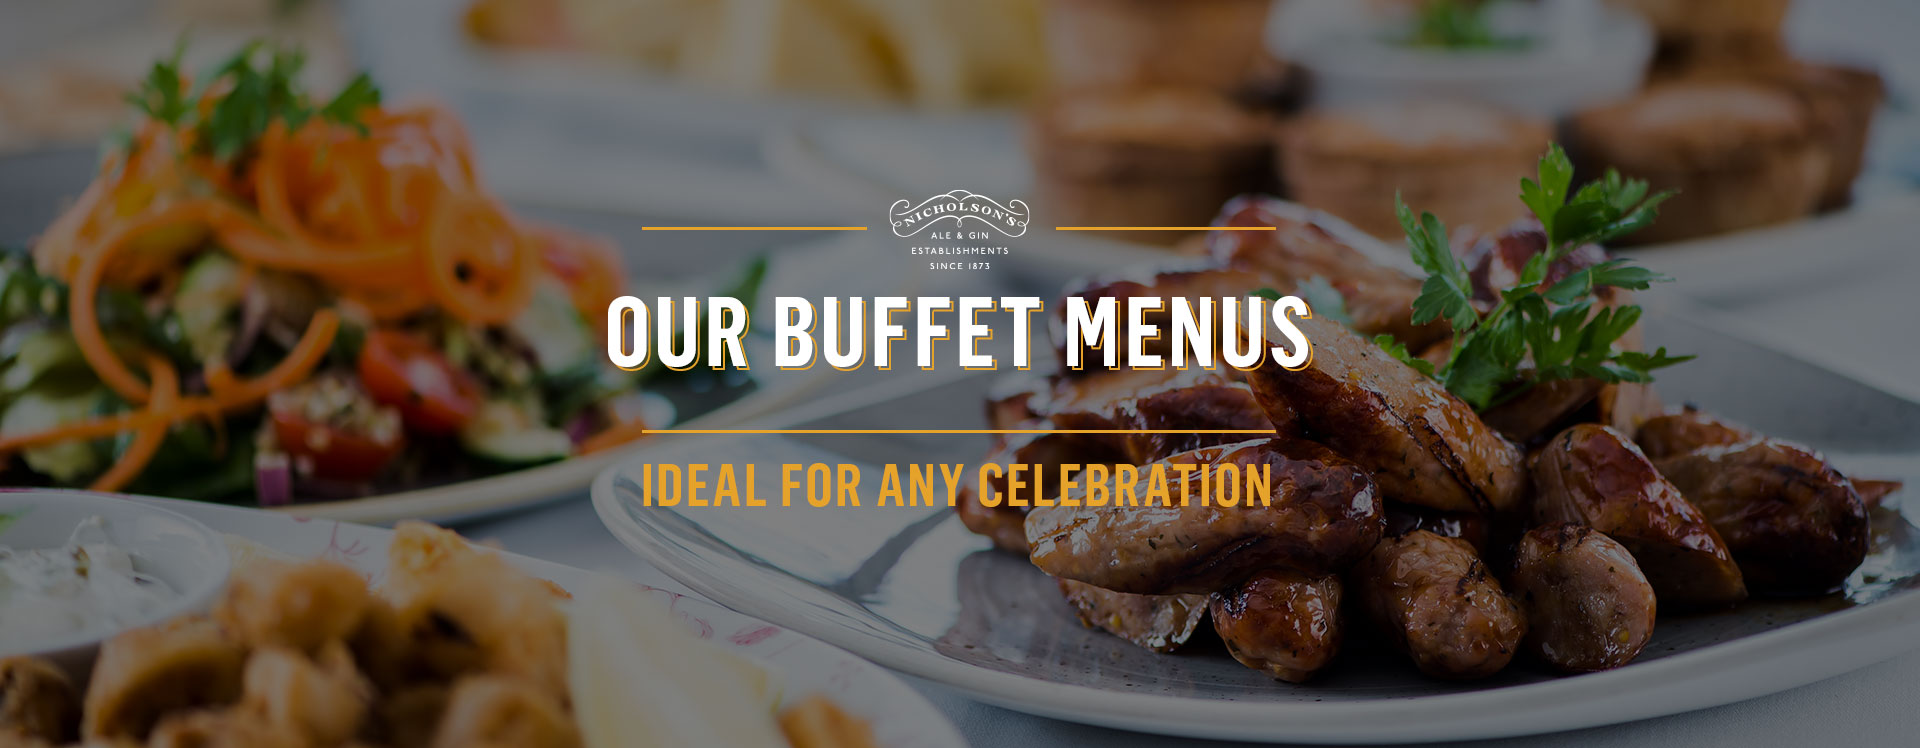 Buffet menu at The Curler's Rest - Book a table